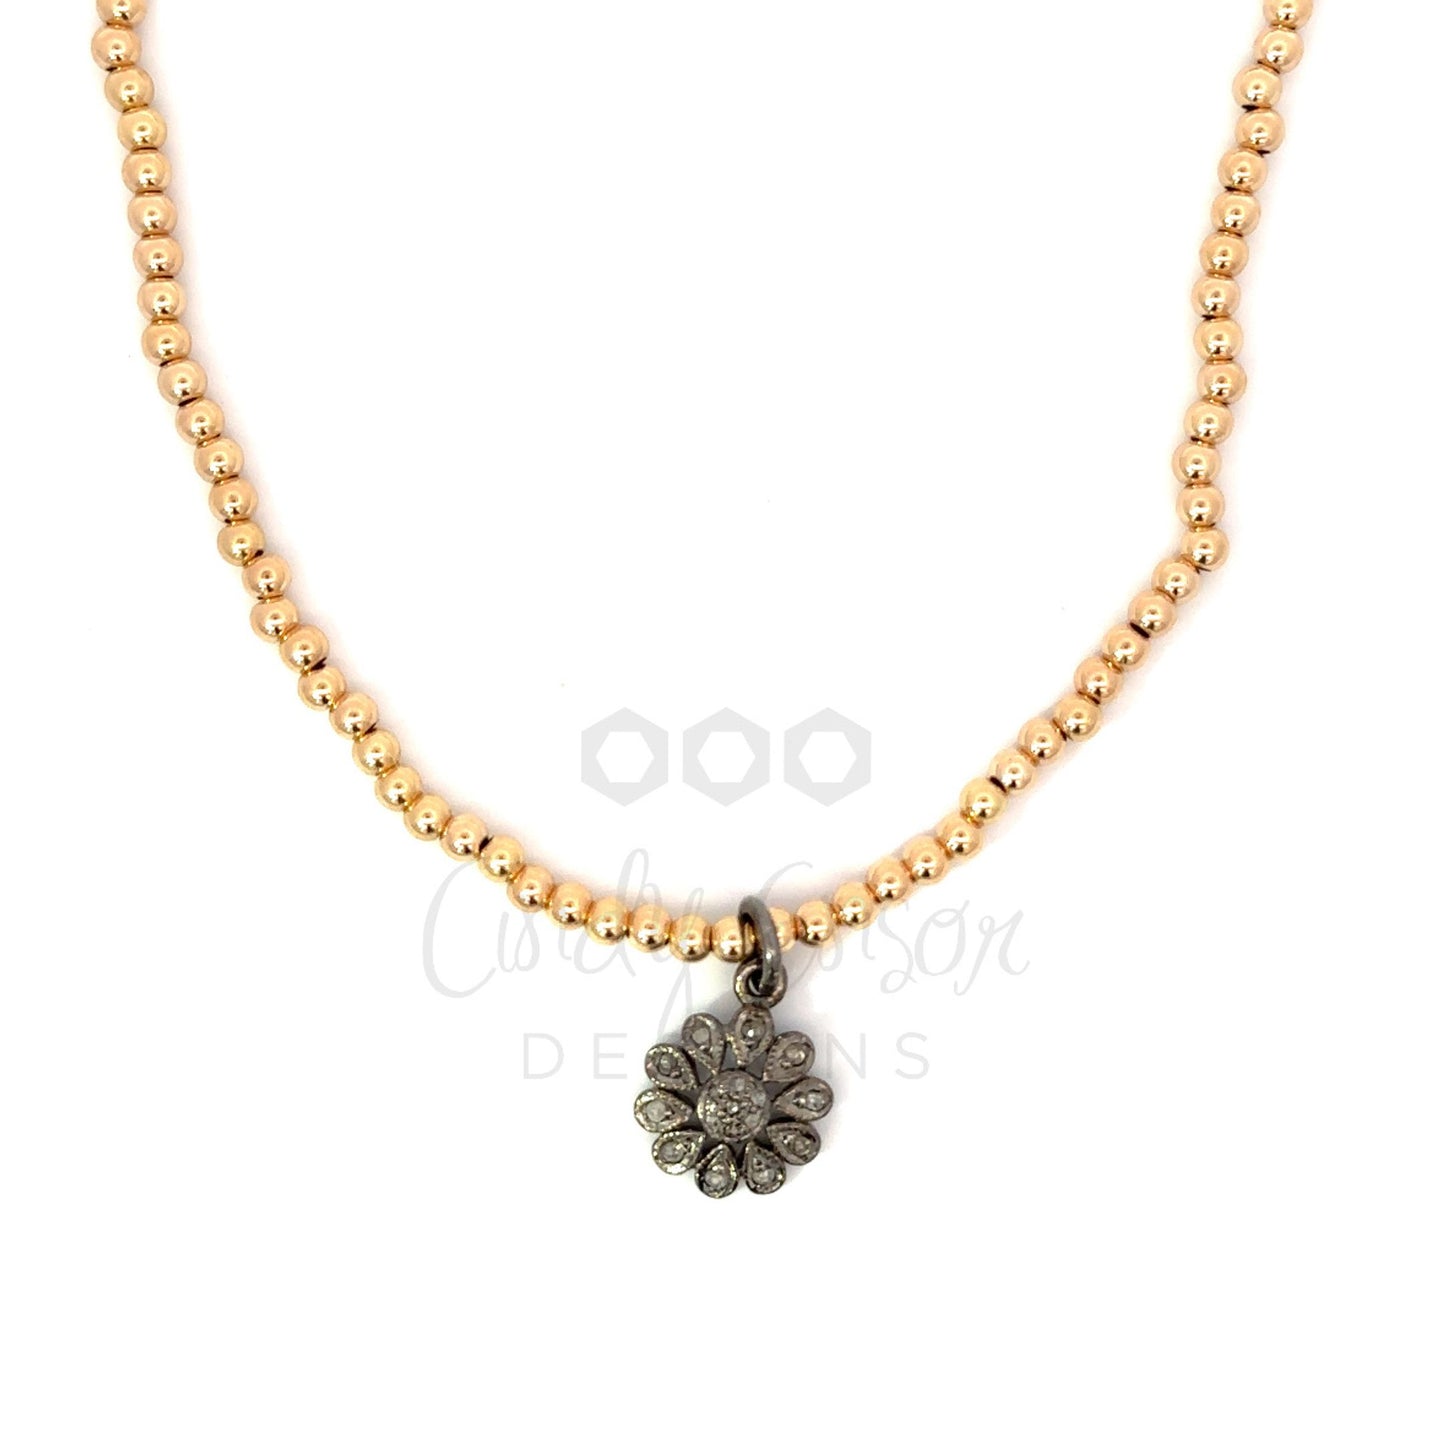 3mm Yellow Gold Filled Bead Necklace with Sterling Silver Pave Diamond Charm